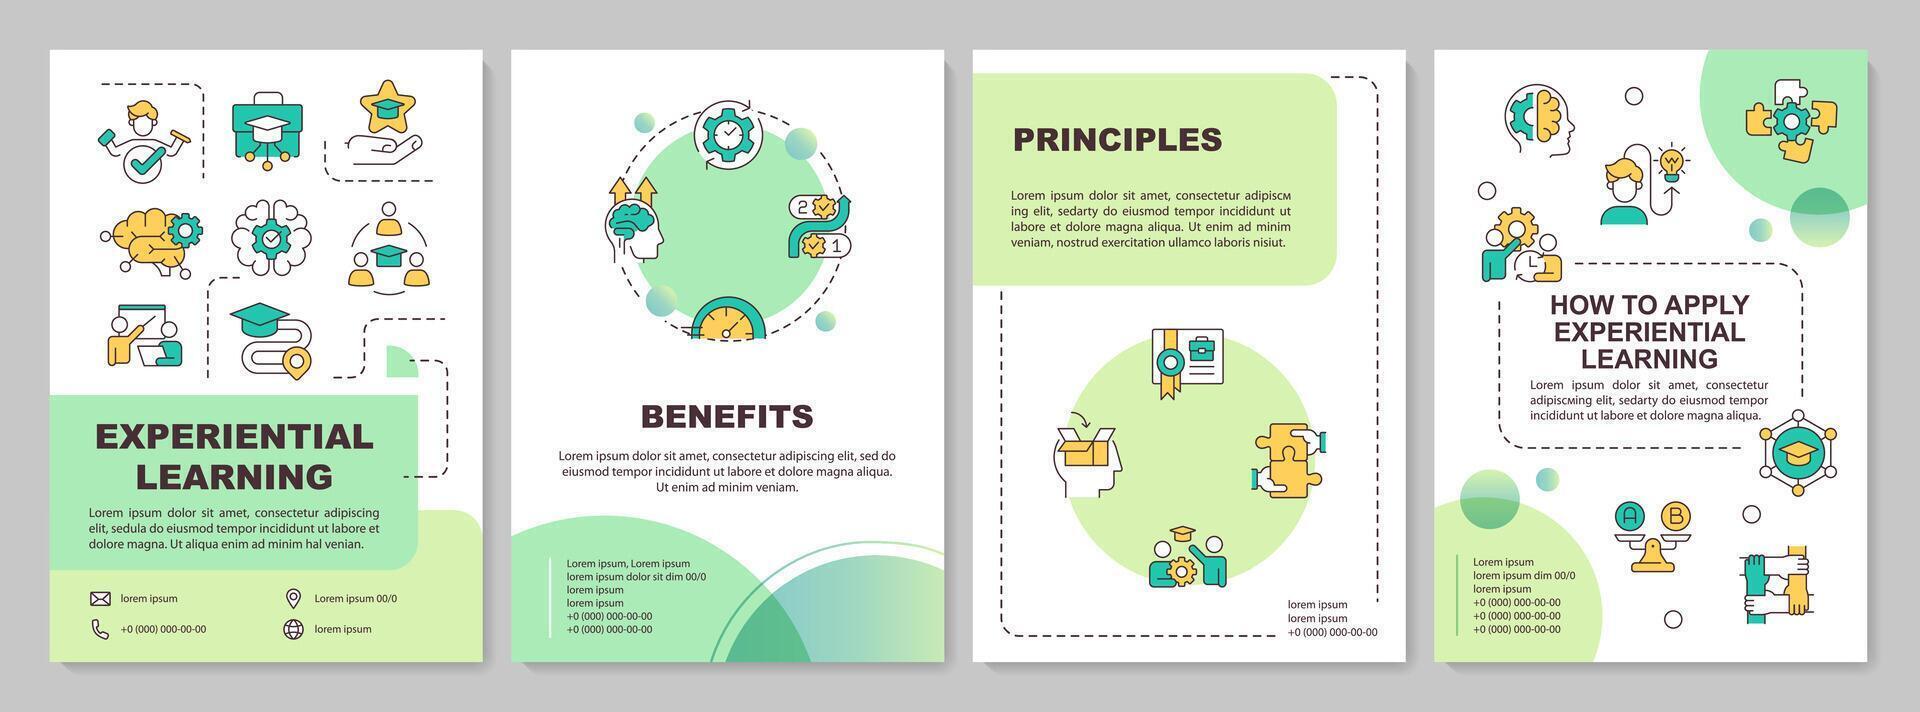 Experiential learning benefits green circle brochure template. Leaflet design with linear icons. Editable 4 vector layouts for presentation, annual reports